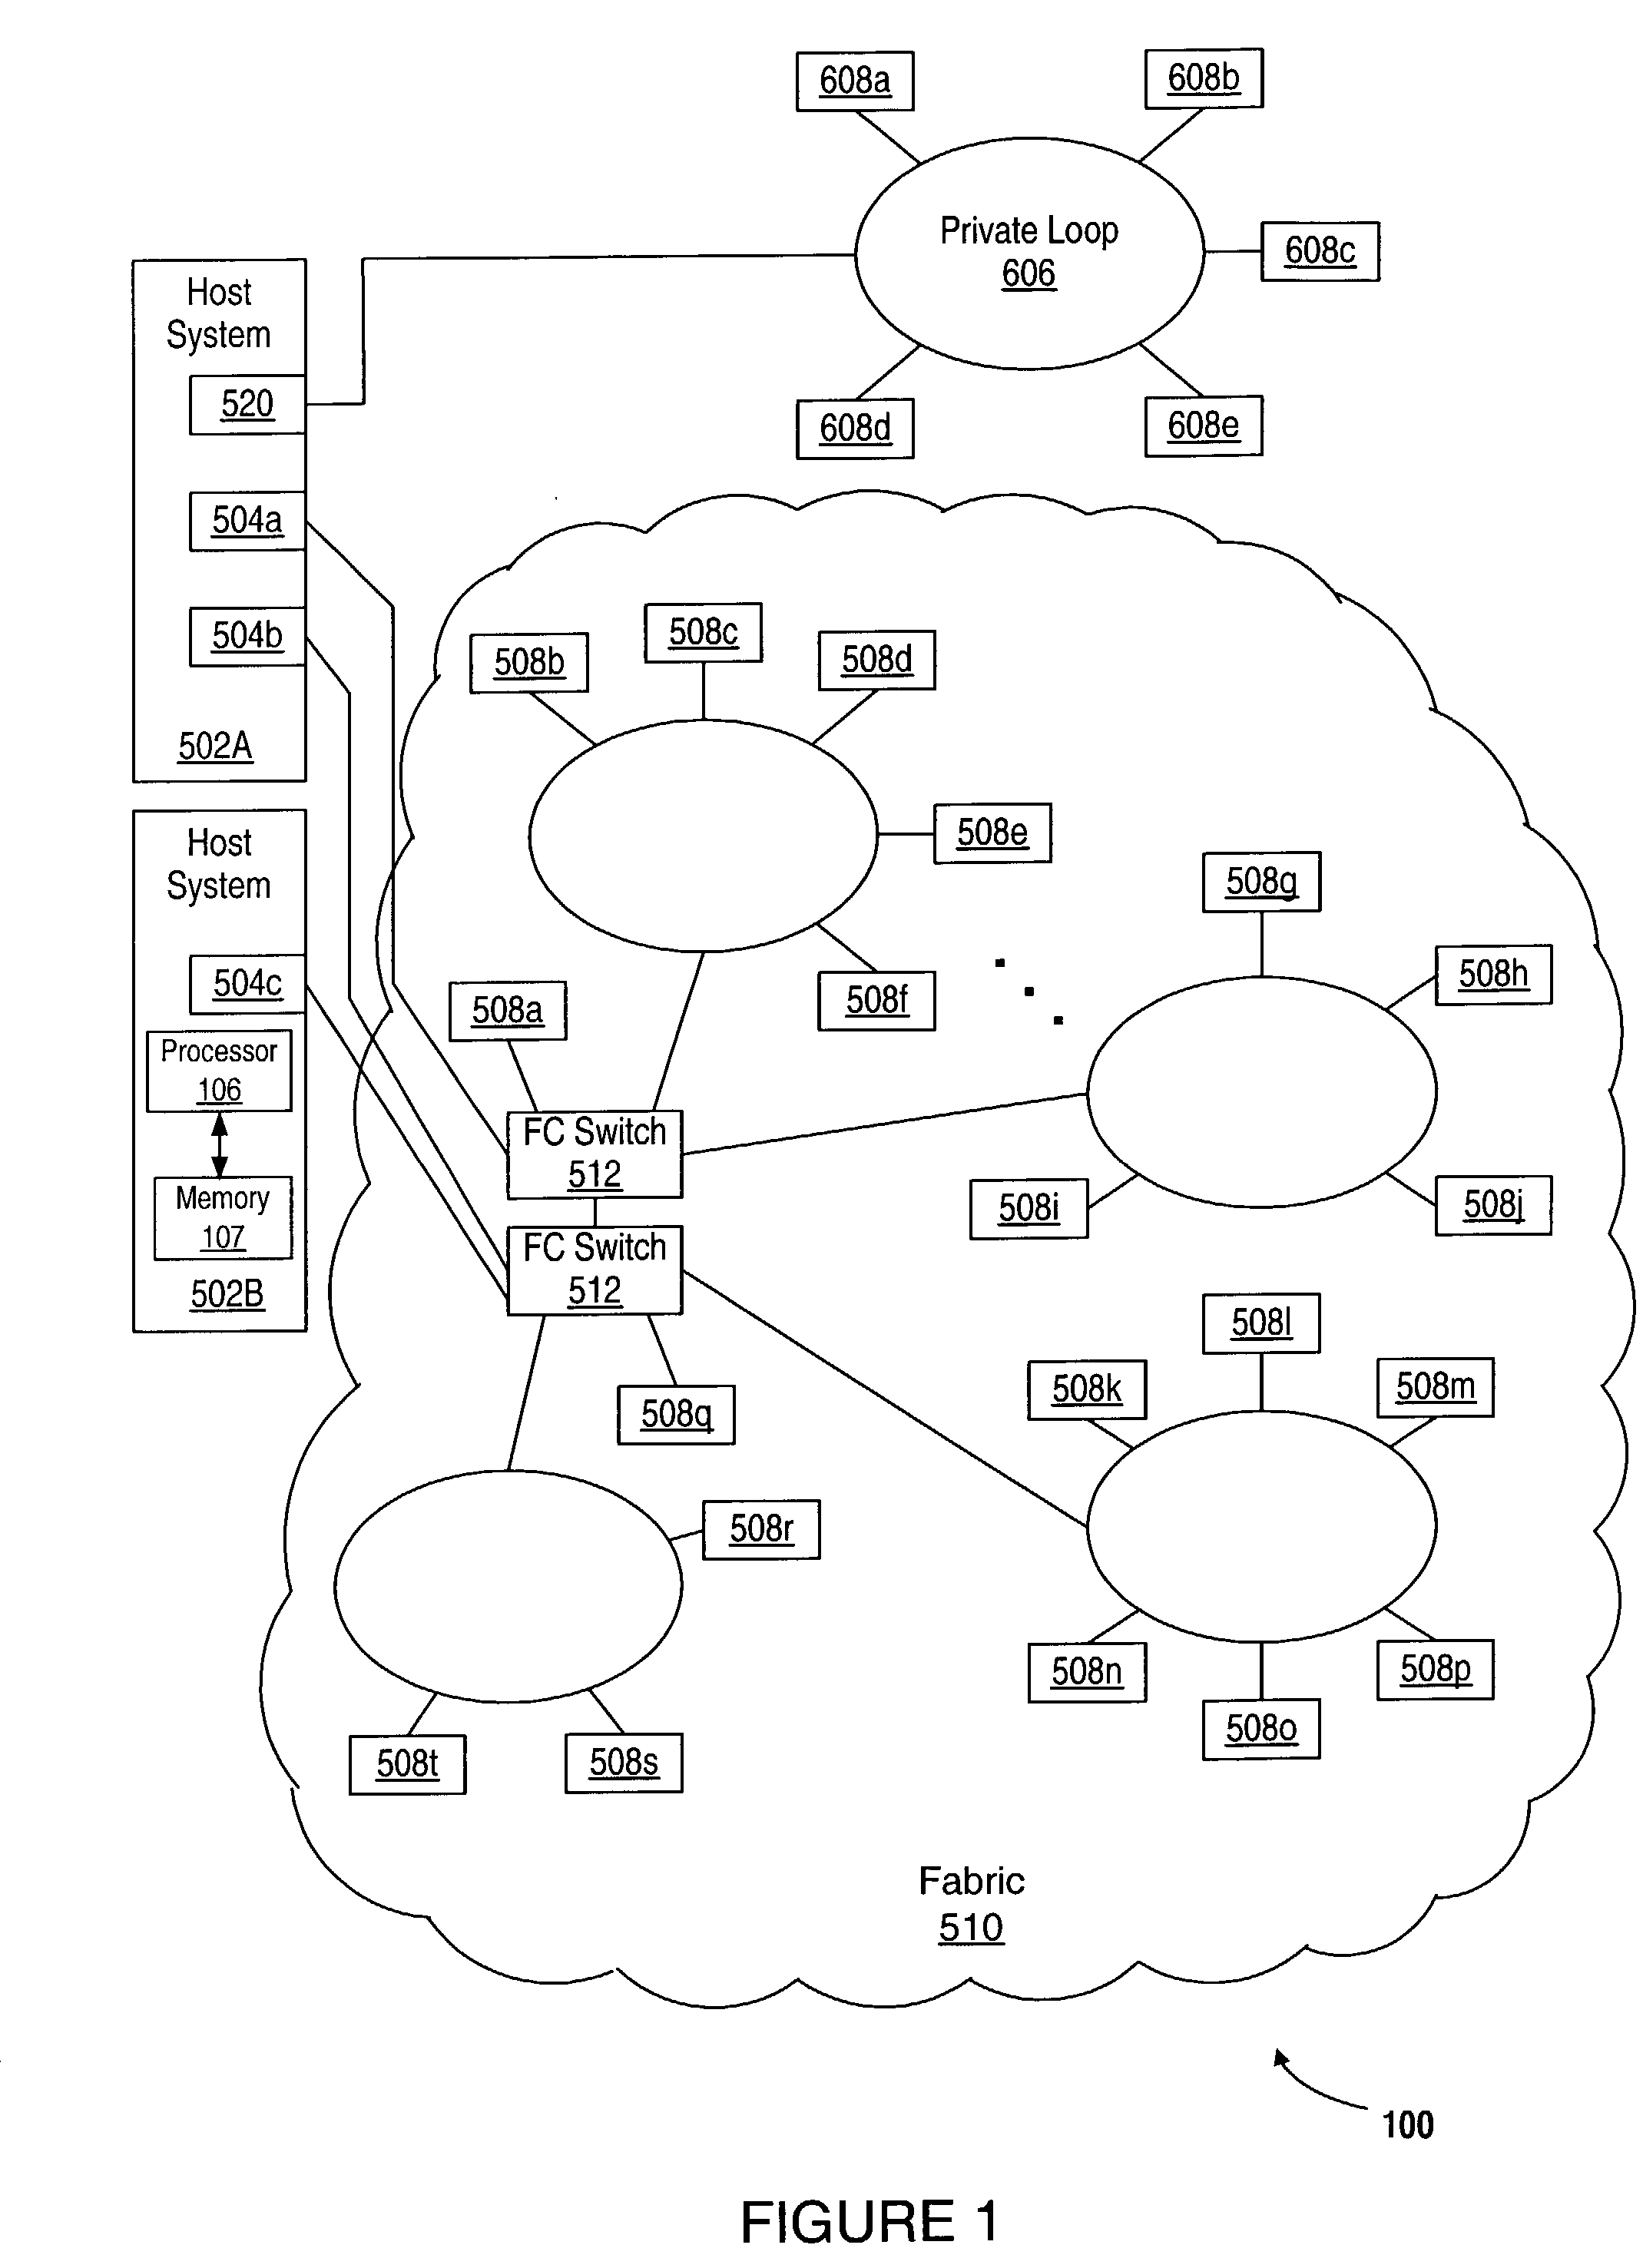 Removable configuration module for storage of component configuration data